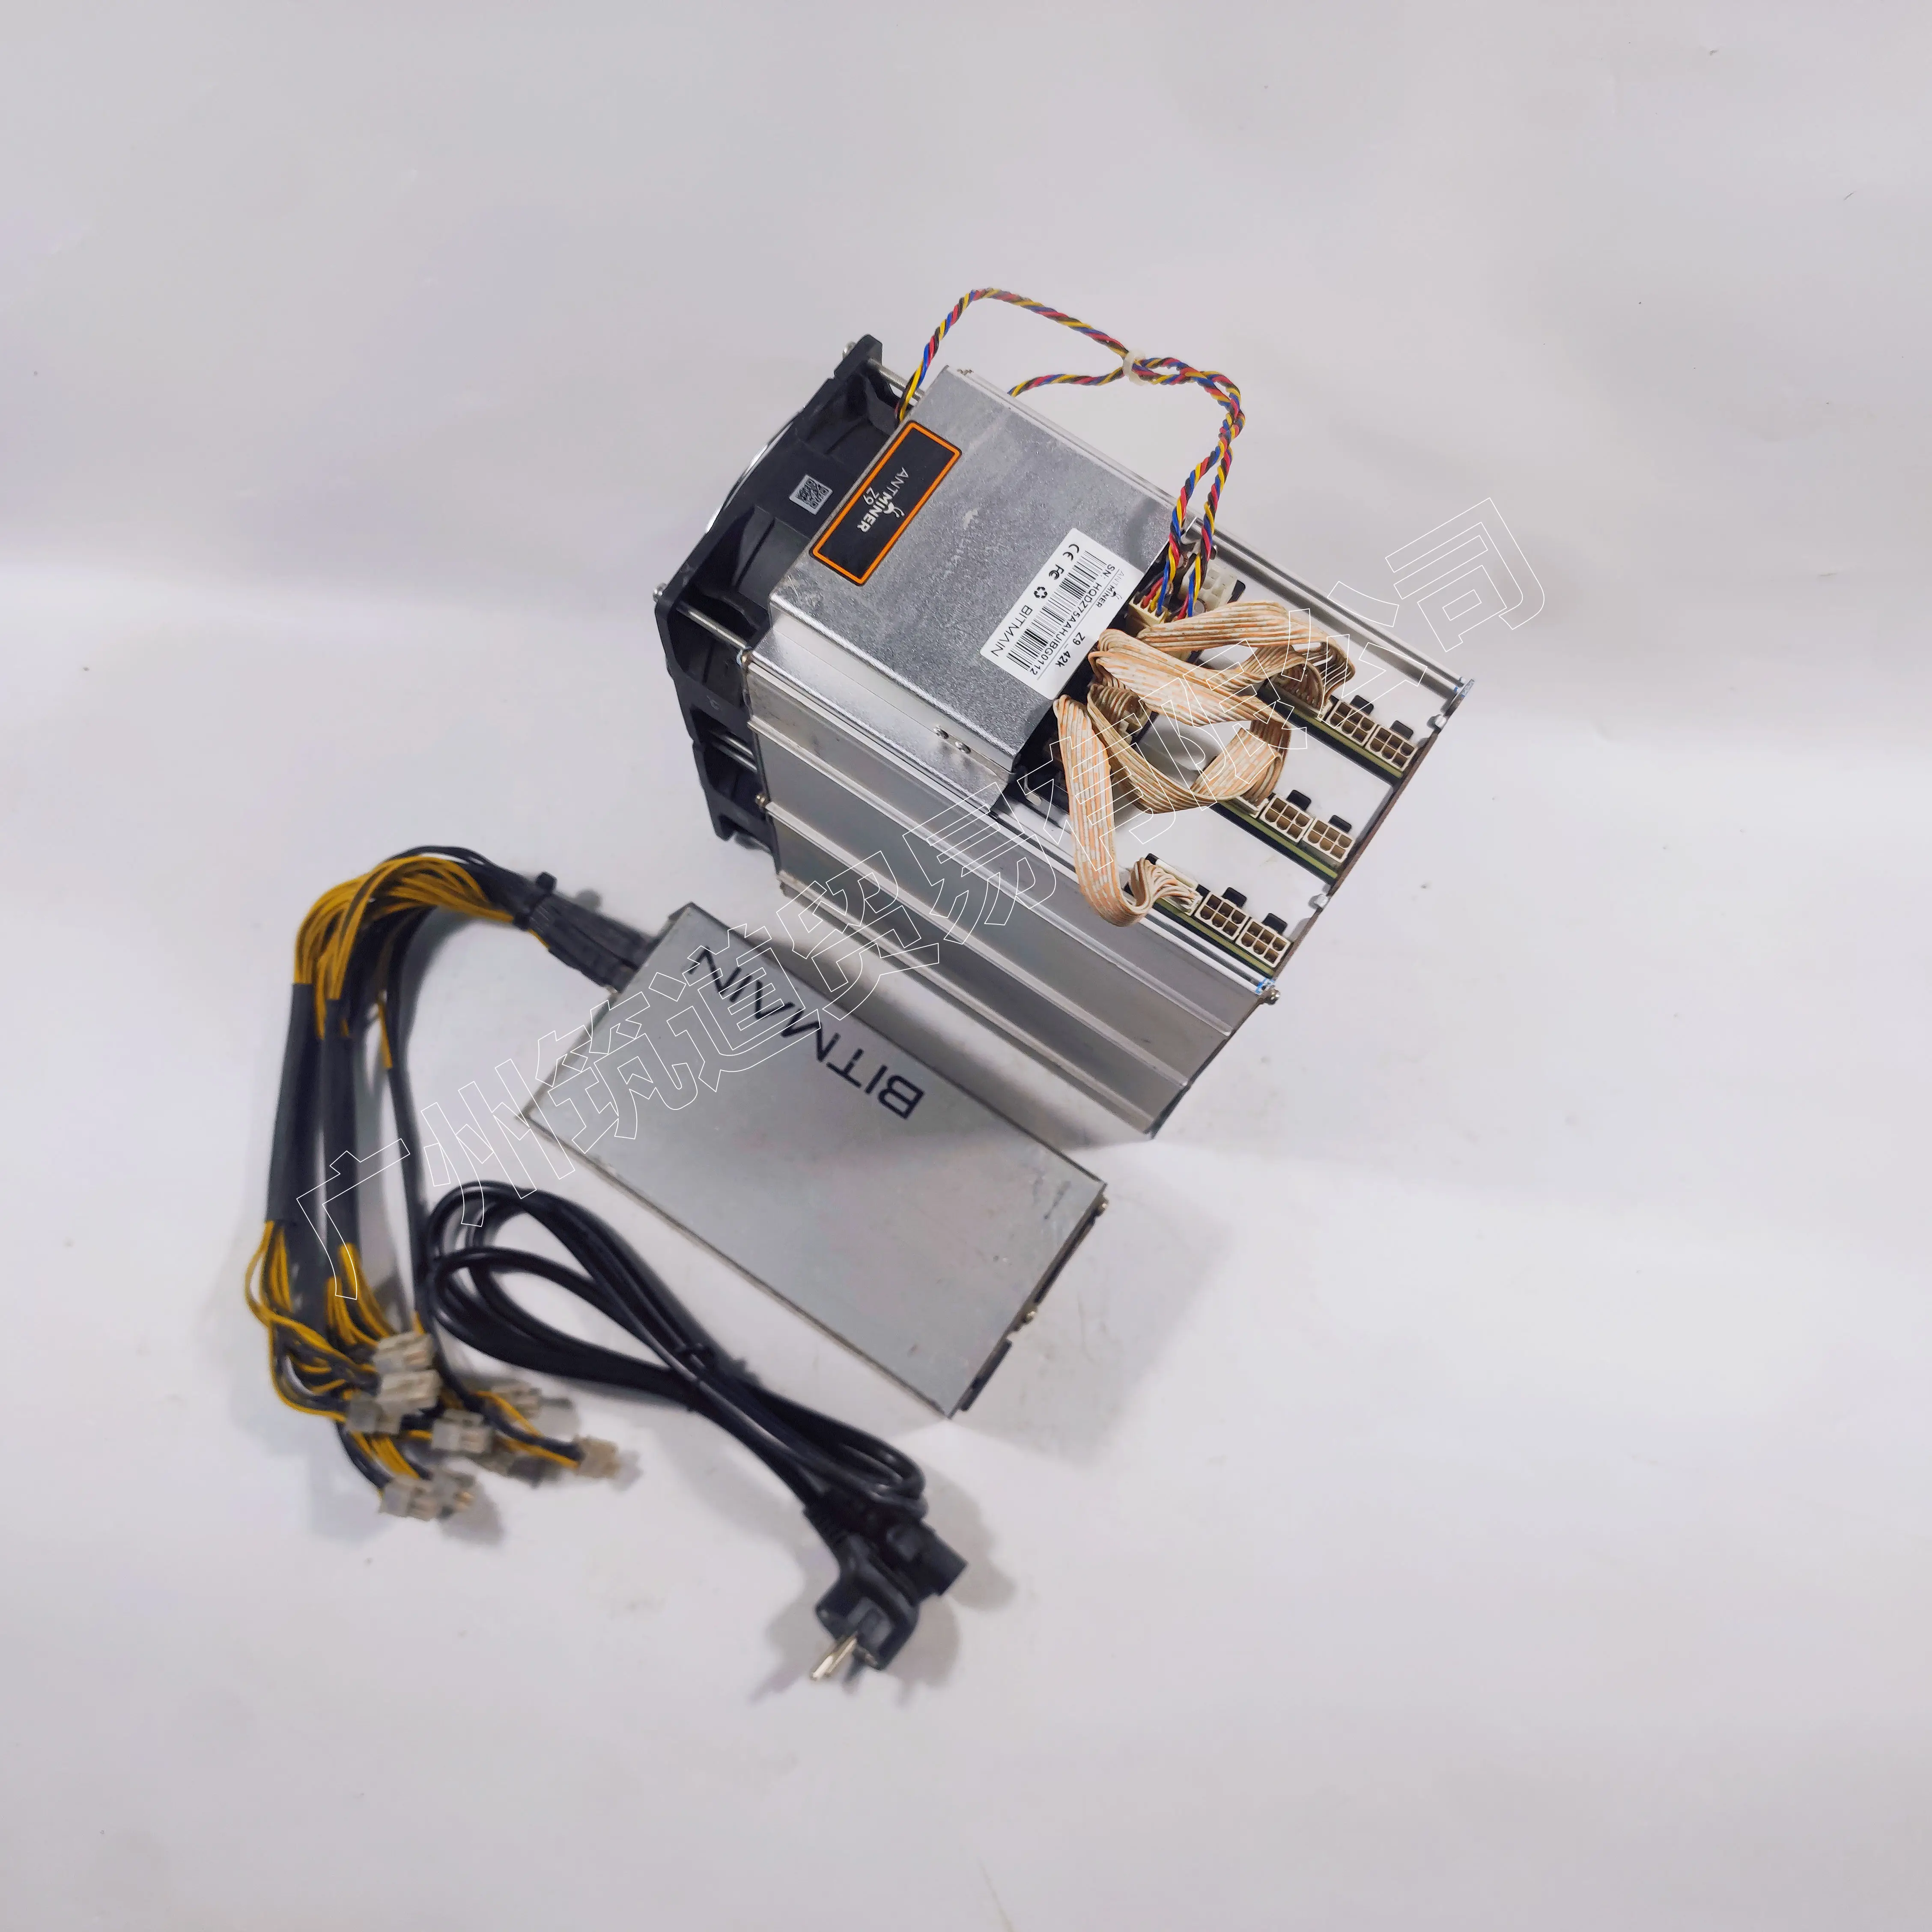 Used Antminer Z9 42k Sol/s With BITMAIN APW3 1600W PSU Asic Equihash Miner Better Than Innosilicon A9 Mini,ZEC ZEN images - 6